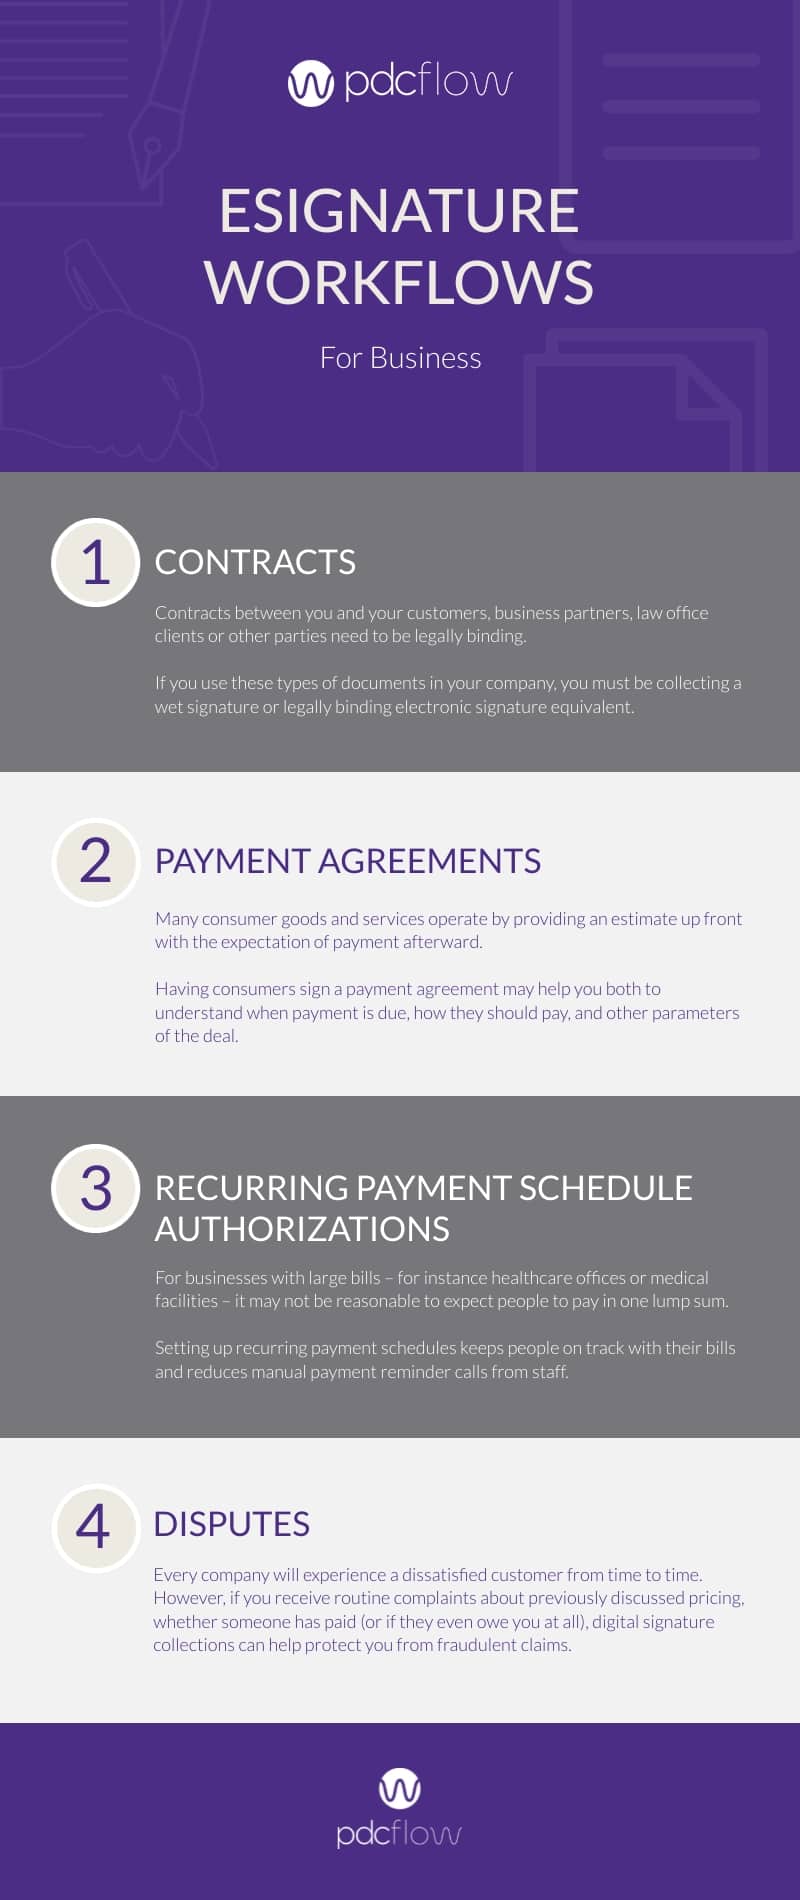 eSignature Workflows for Business Infographic